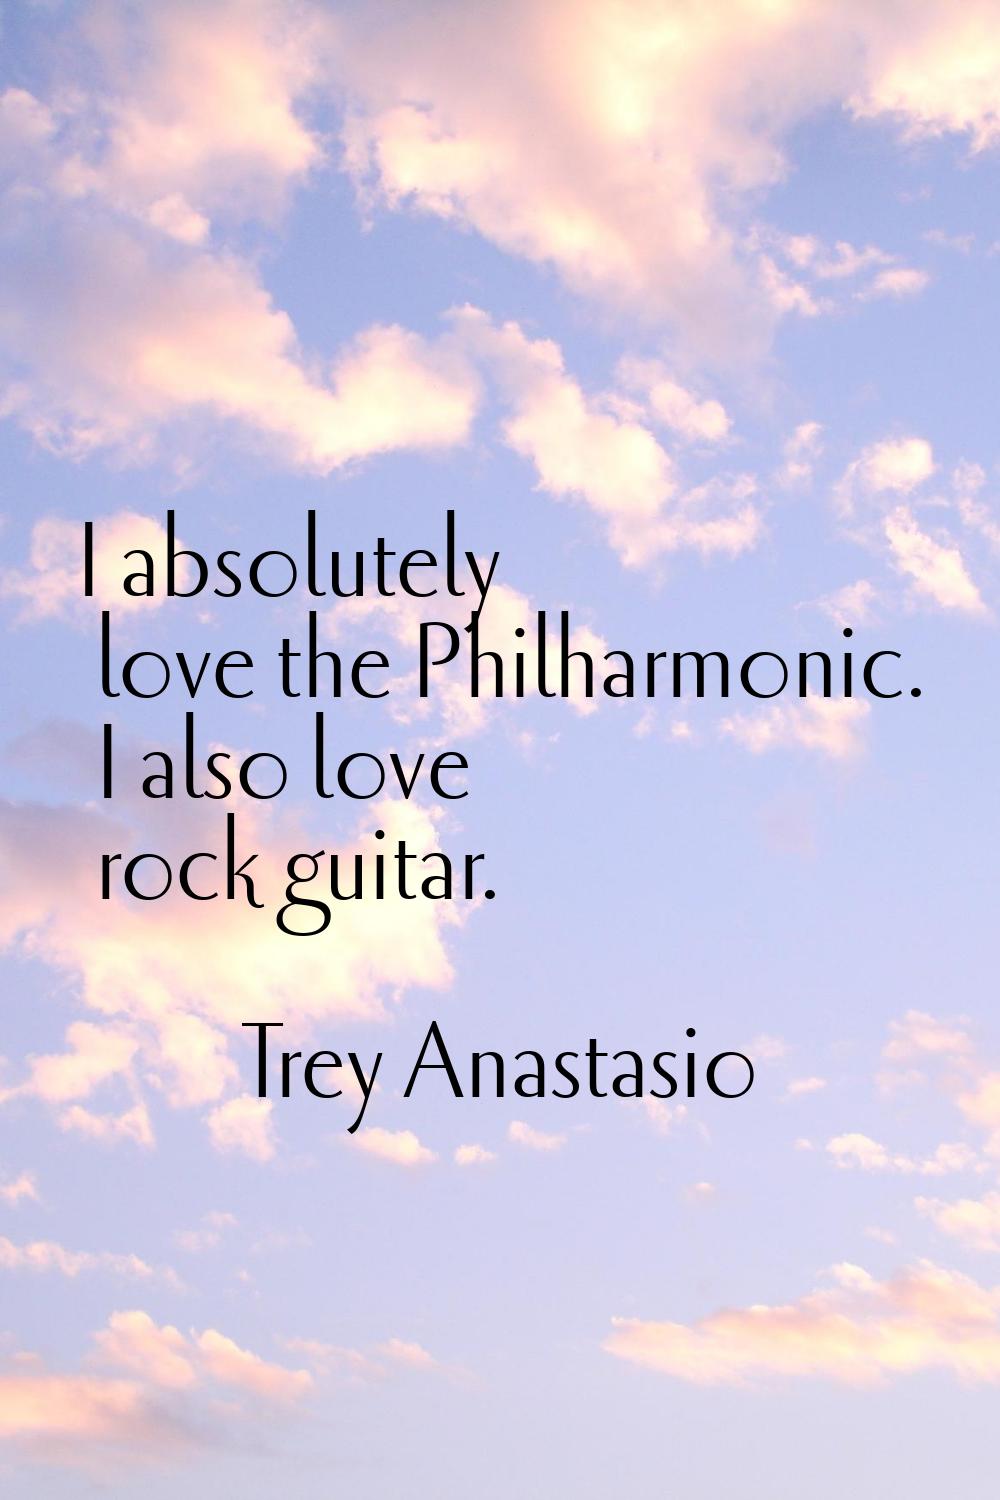 I absolutely love the Philharmonic. I also love rock guitar.